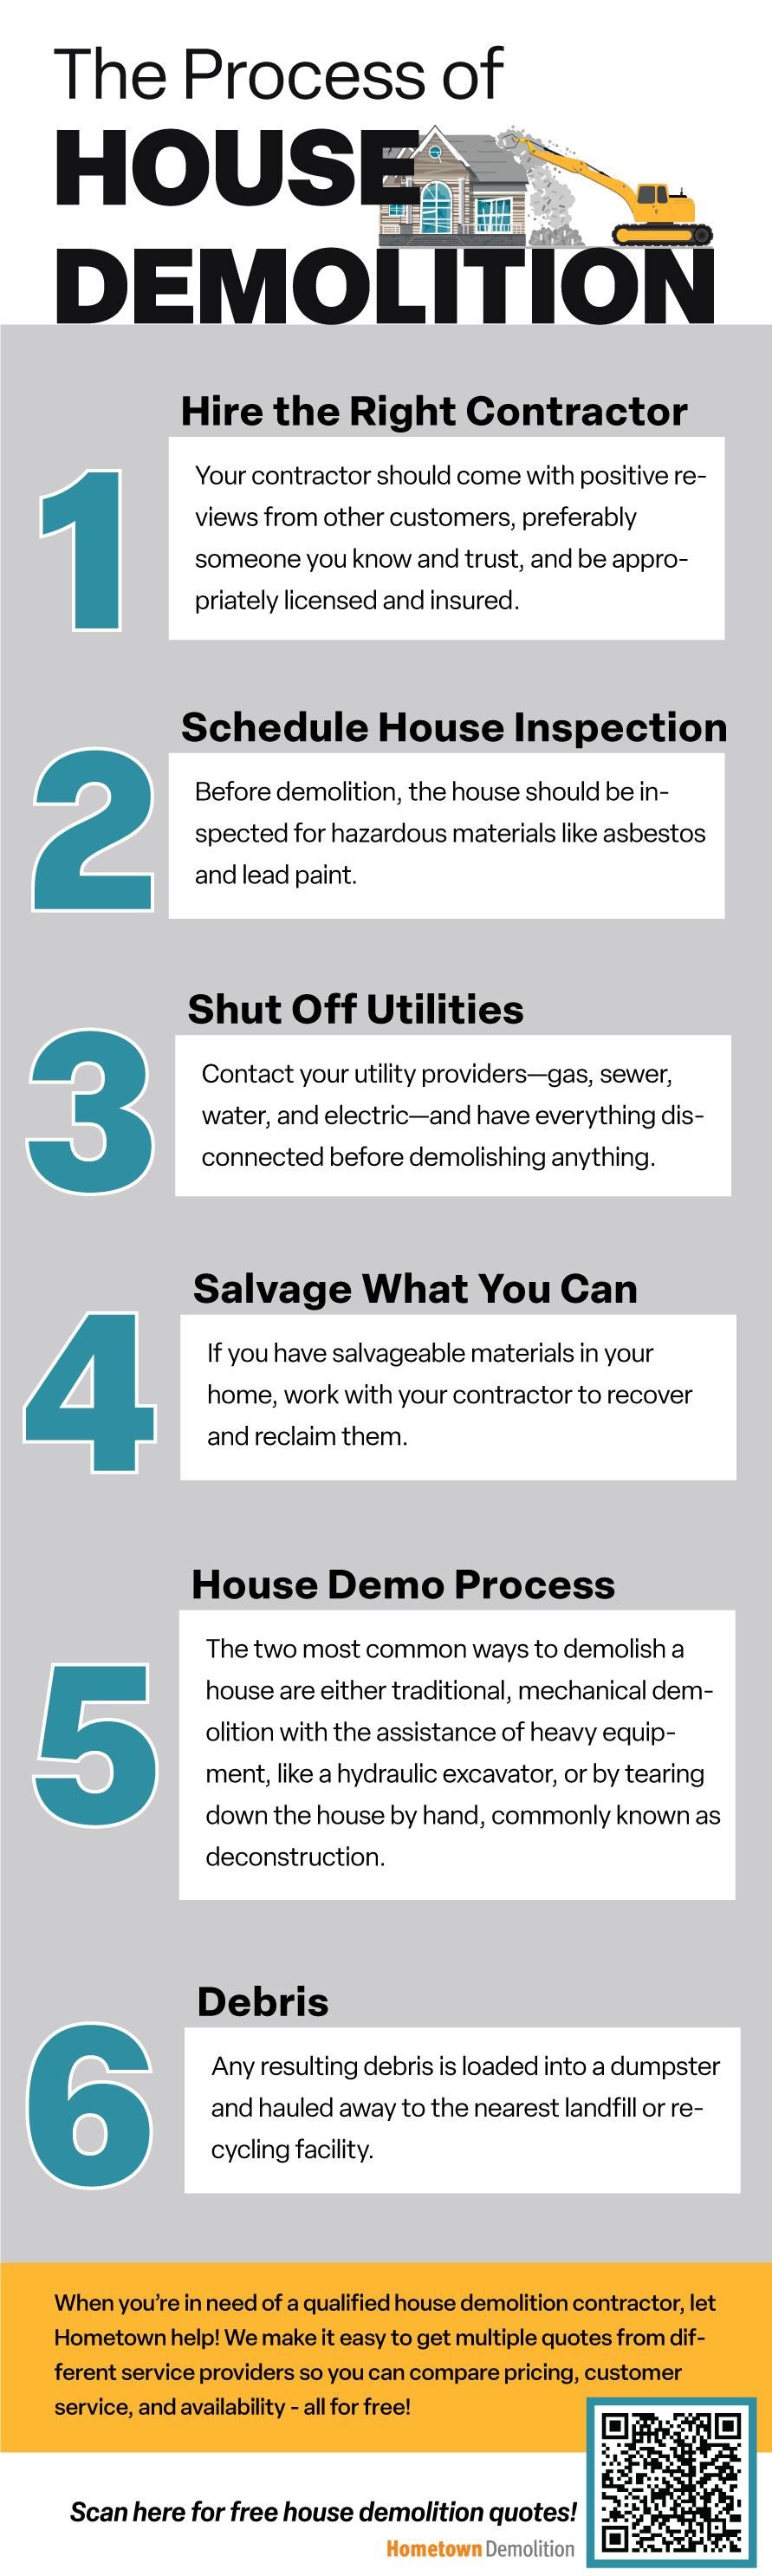 the process of house demolition infographic